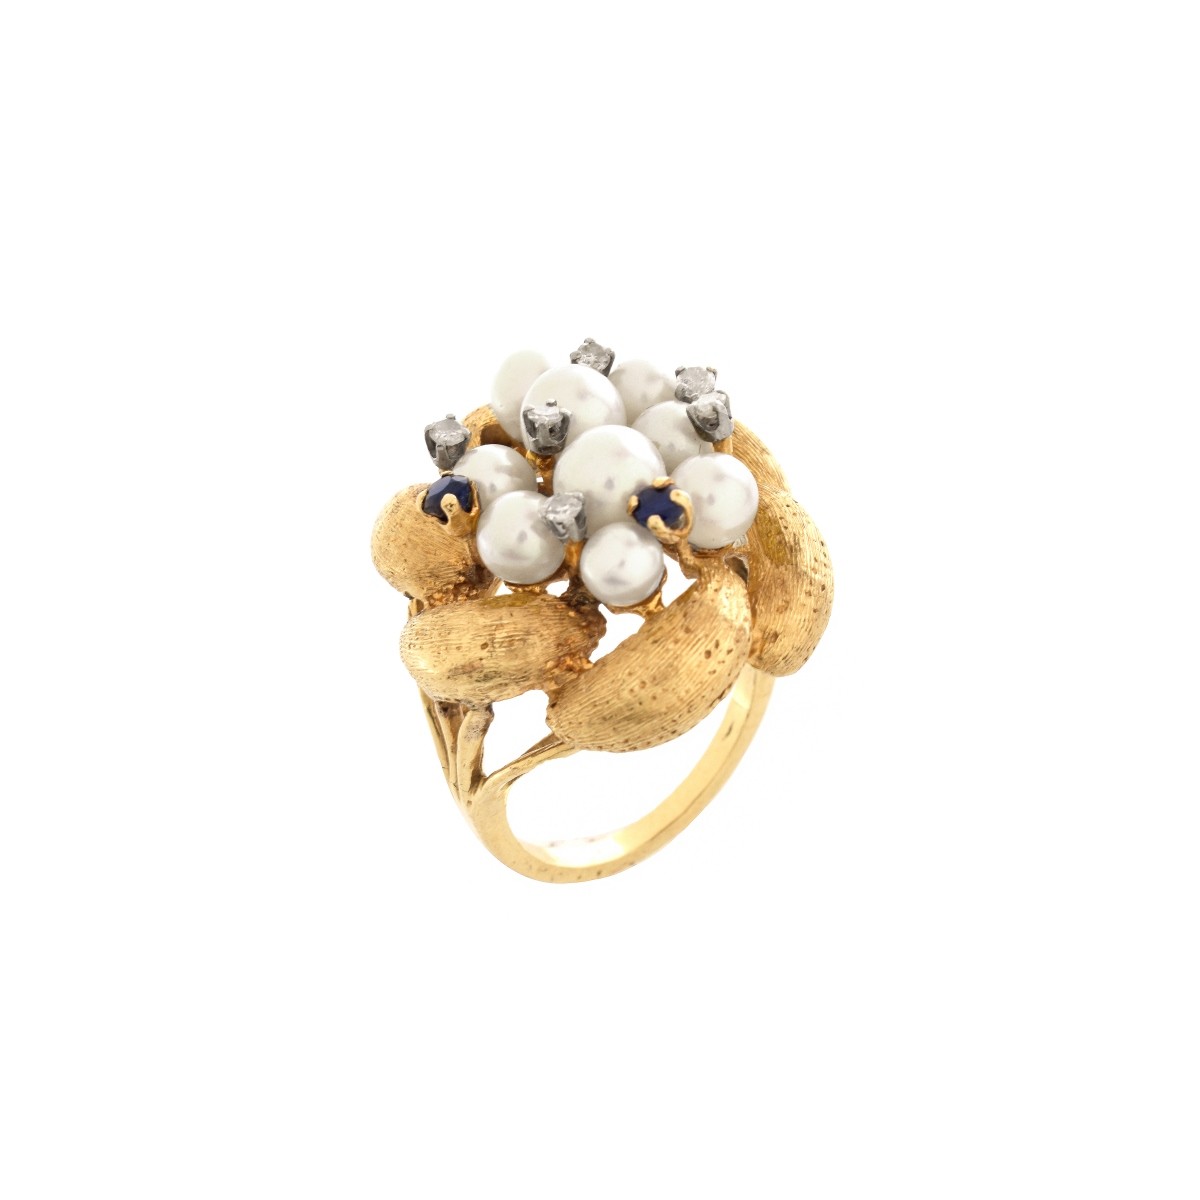 Pearl, Diamond, Sapphire and 14K Ring